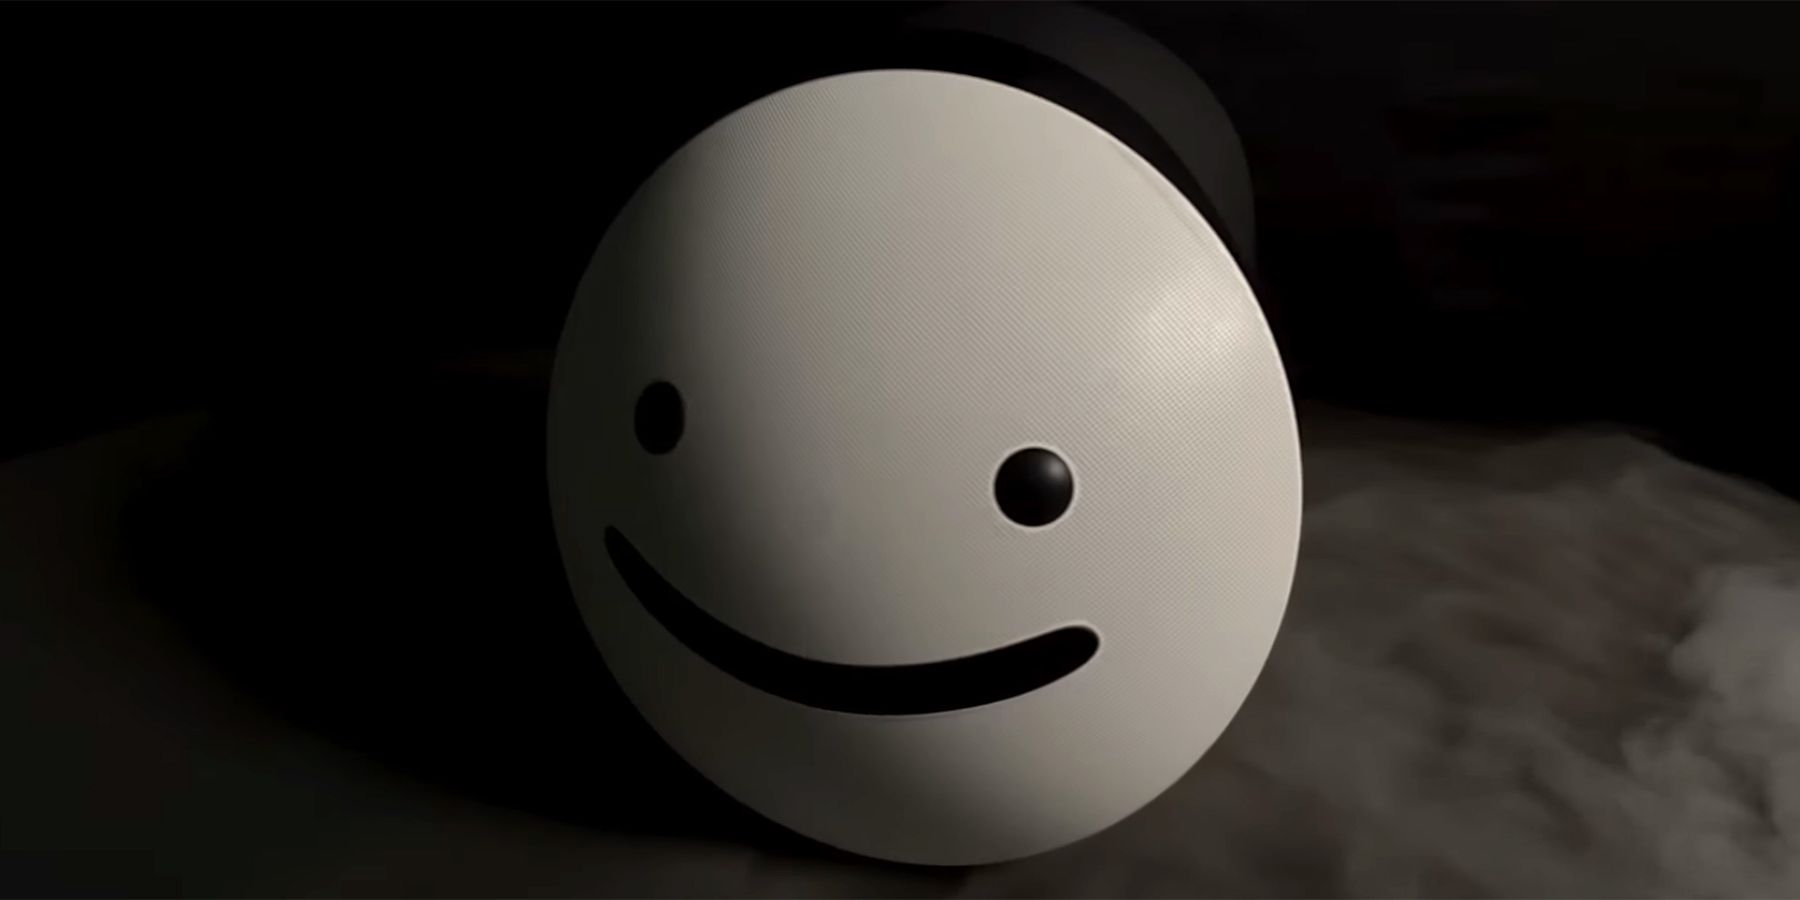 Dream Face Reveal but it's in ROBLOX 